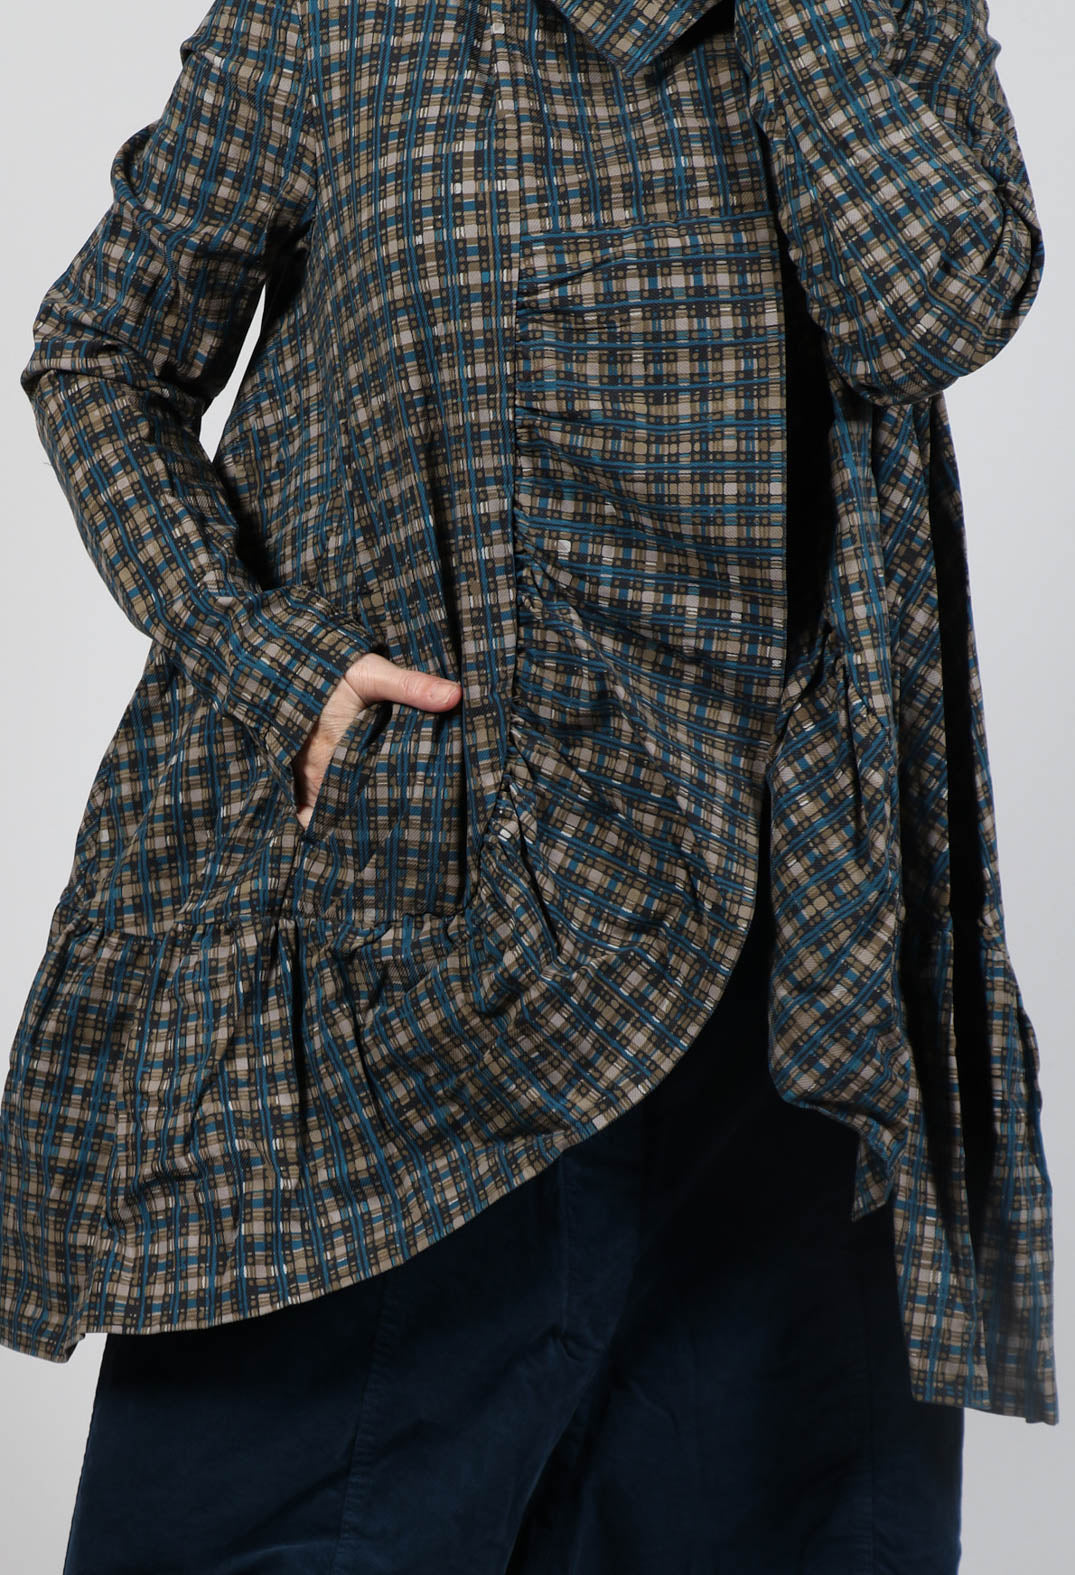 Jacket with High Low Peplum Hem in Ink Check